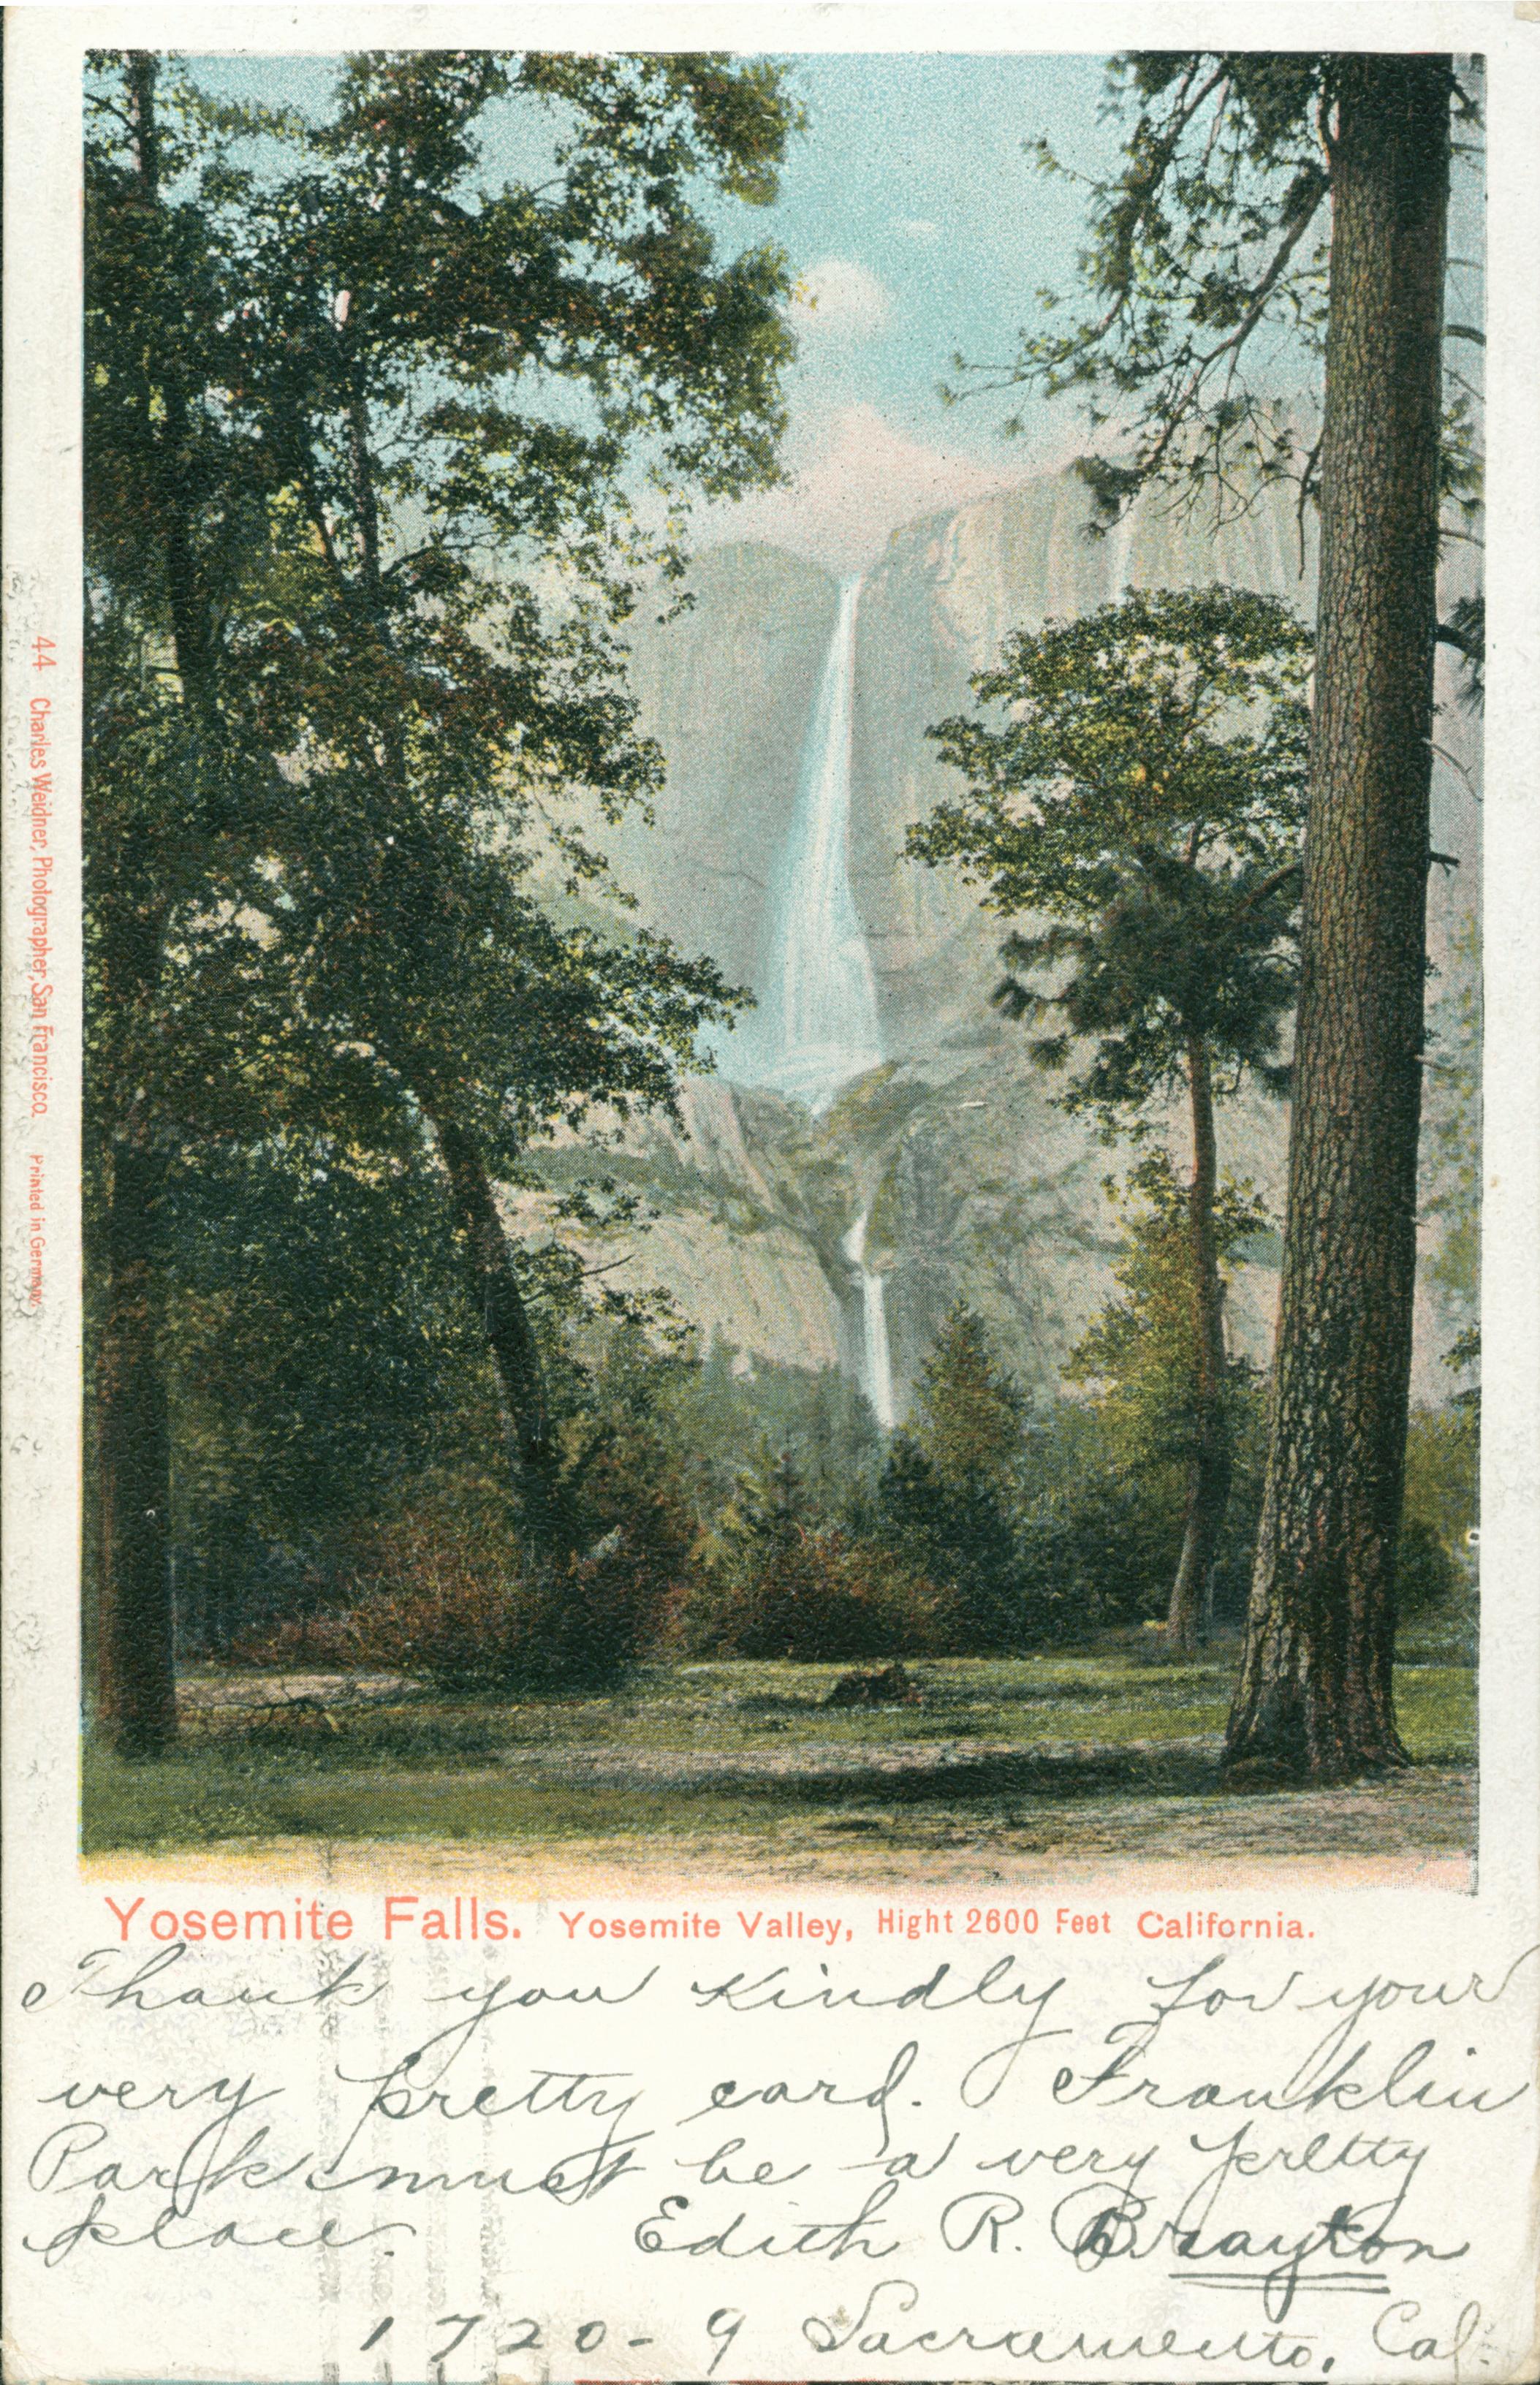 Shows a view of Yosemite Falls framed by trees